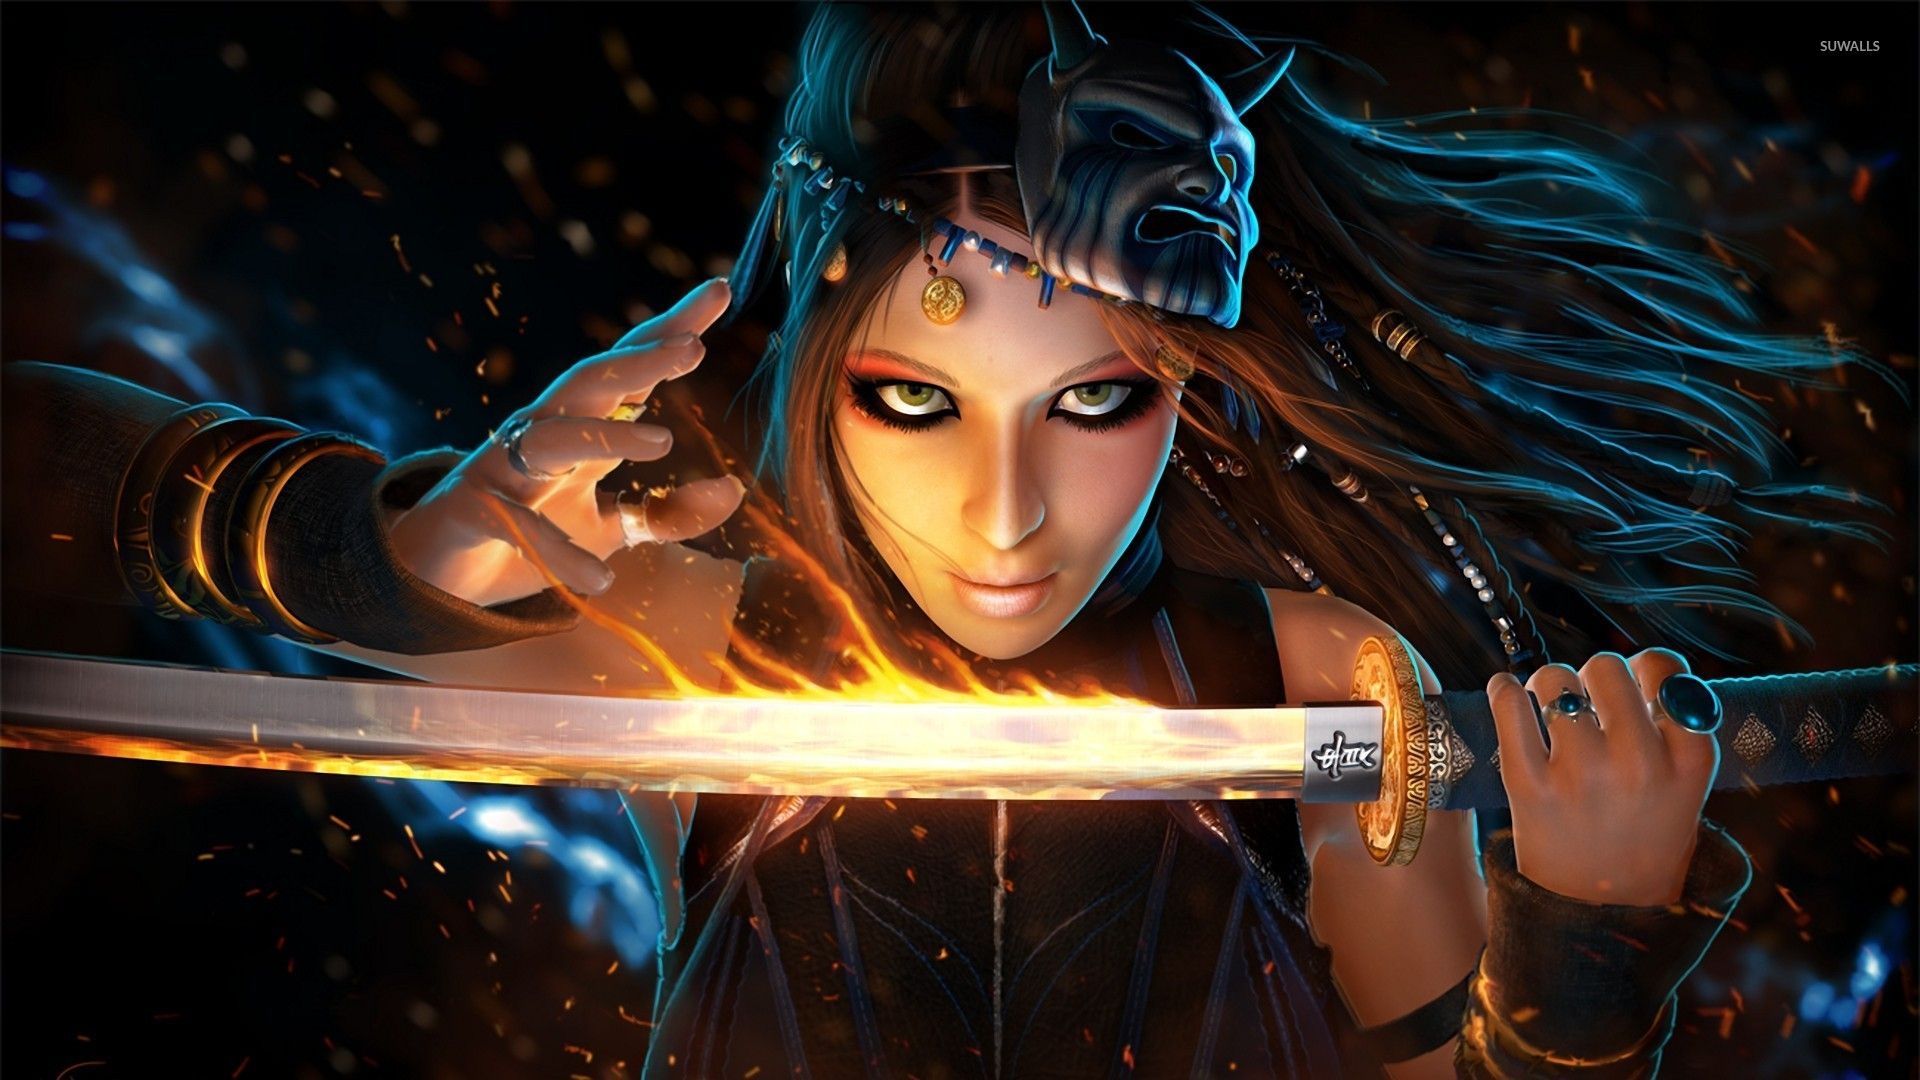 Woman with her flaming sword wallpaper wallpaper